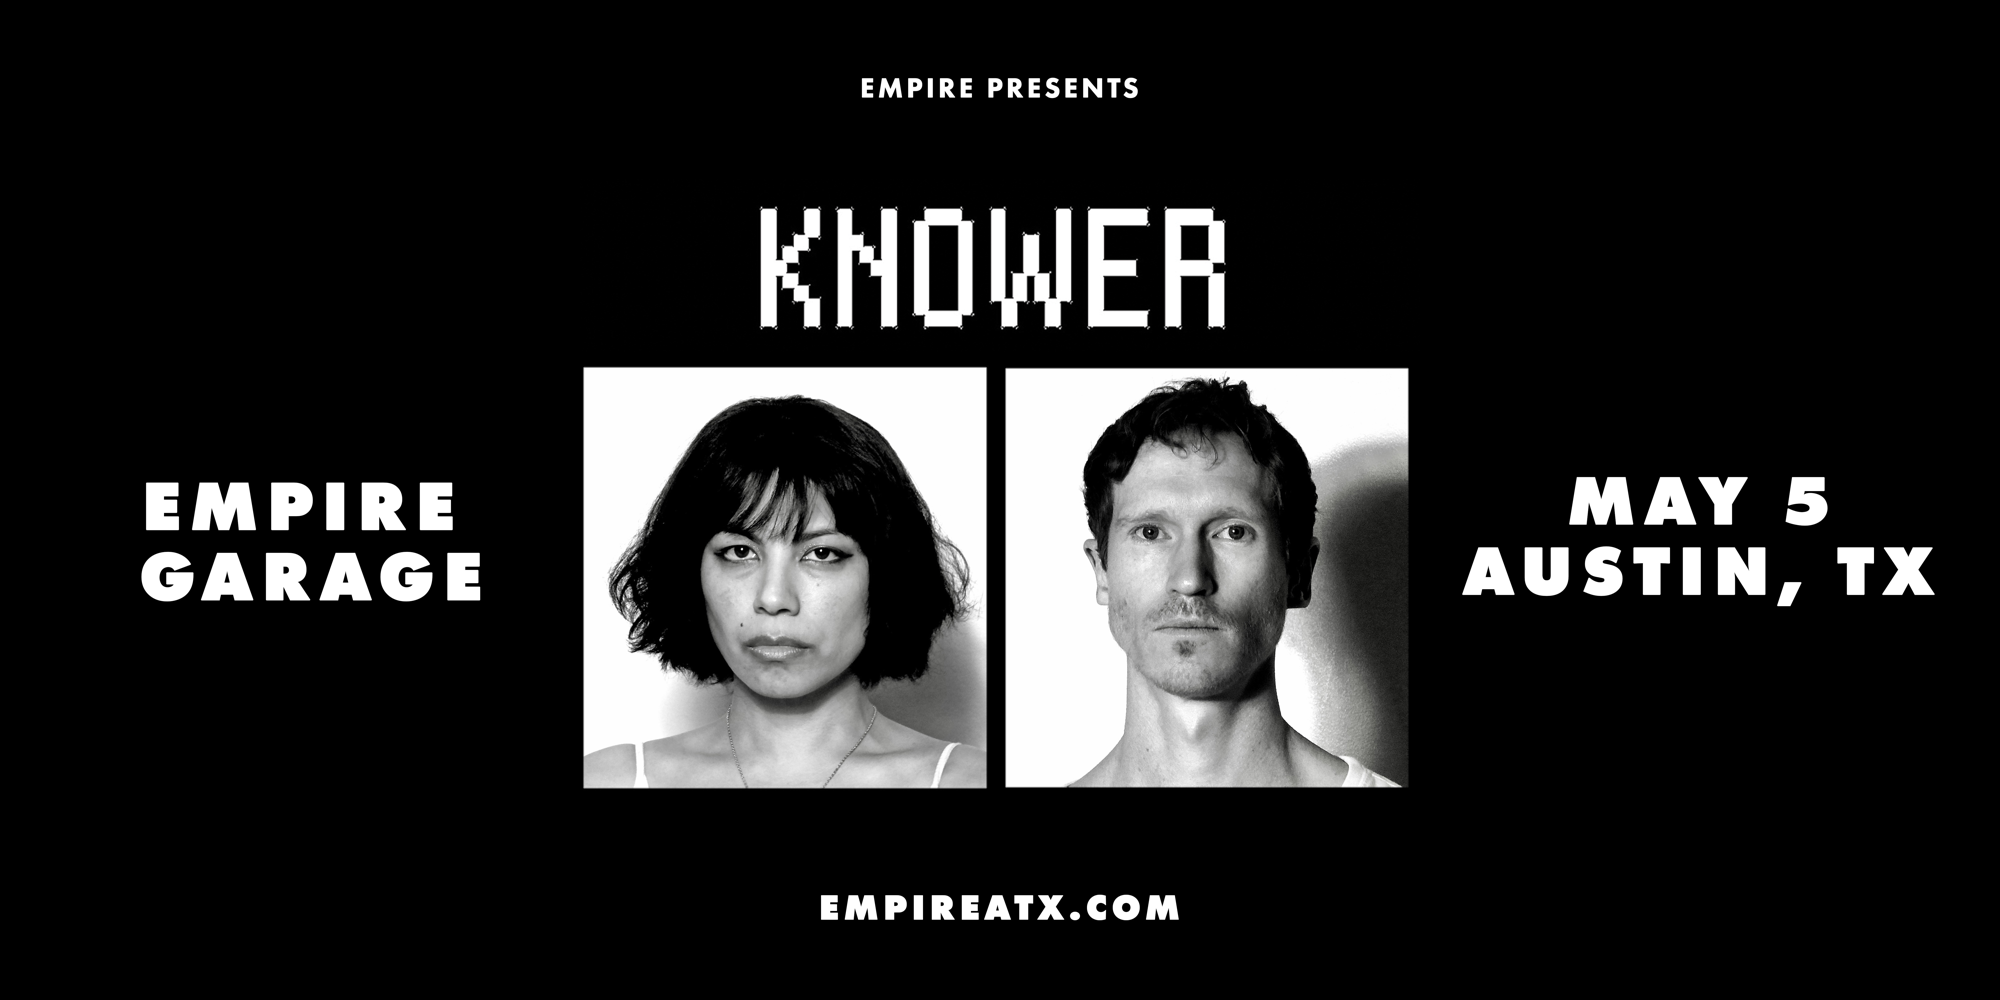 Empire Presents: KNOWER at Empire Garage on 5/5 promotional image